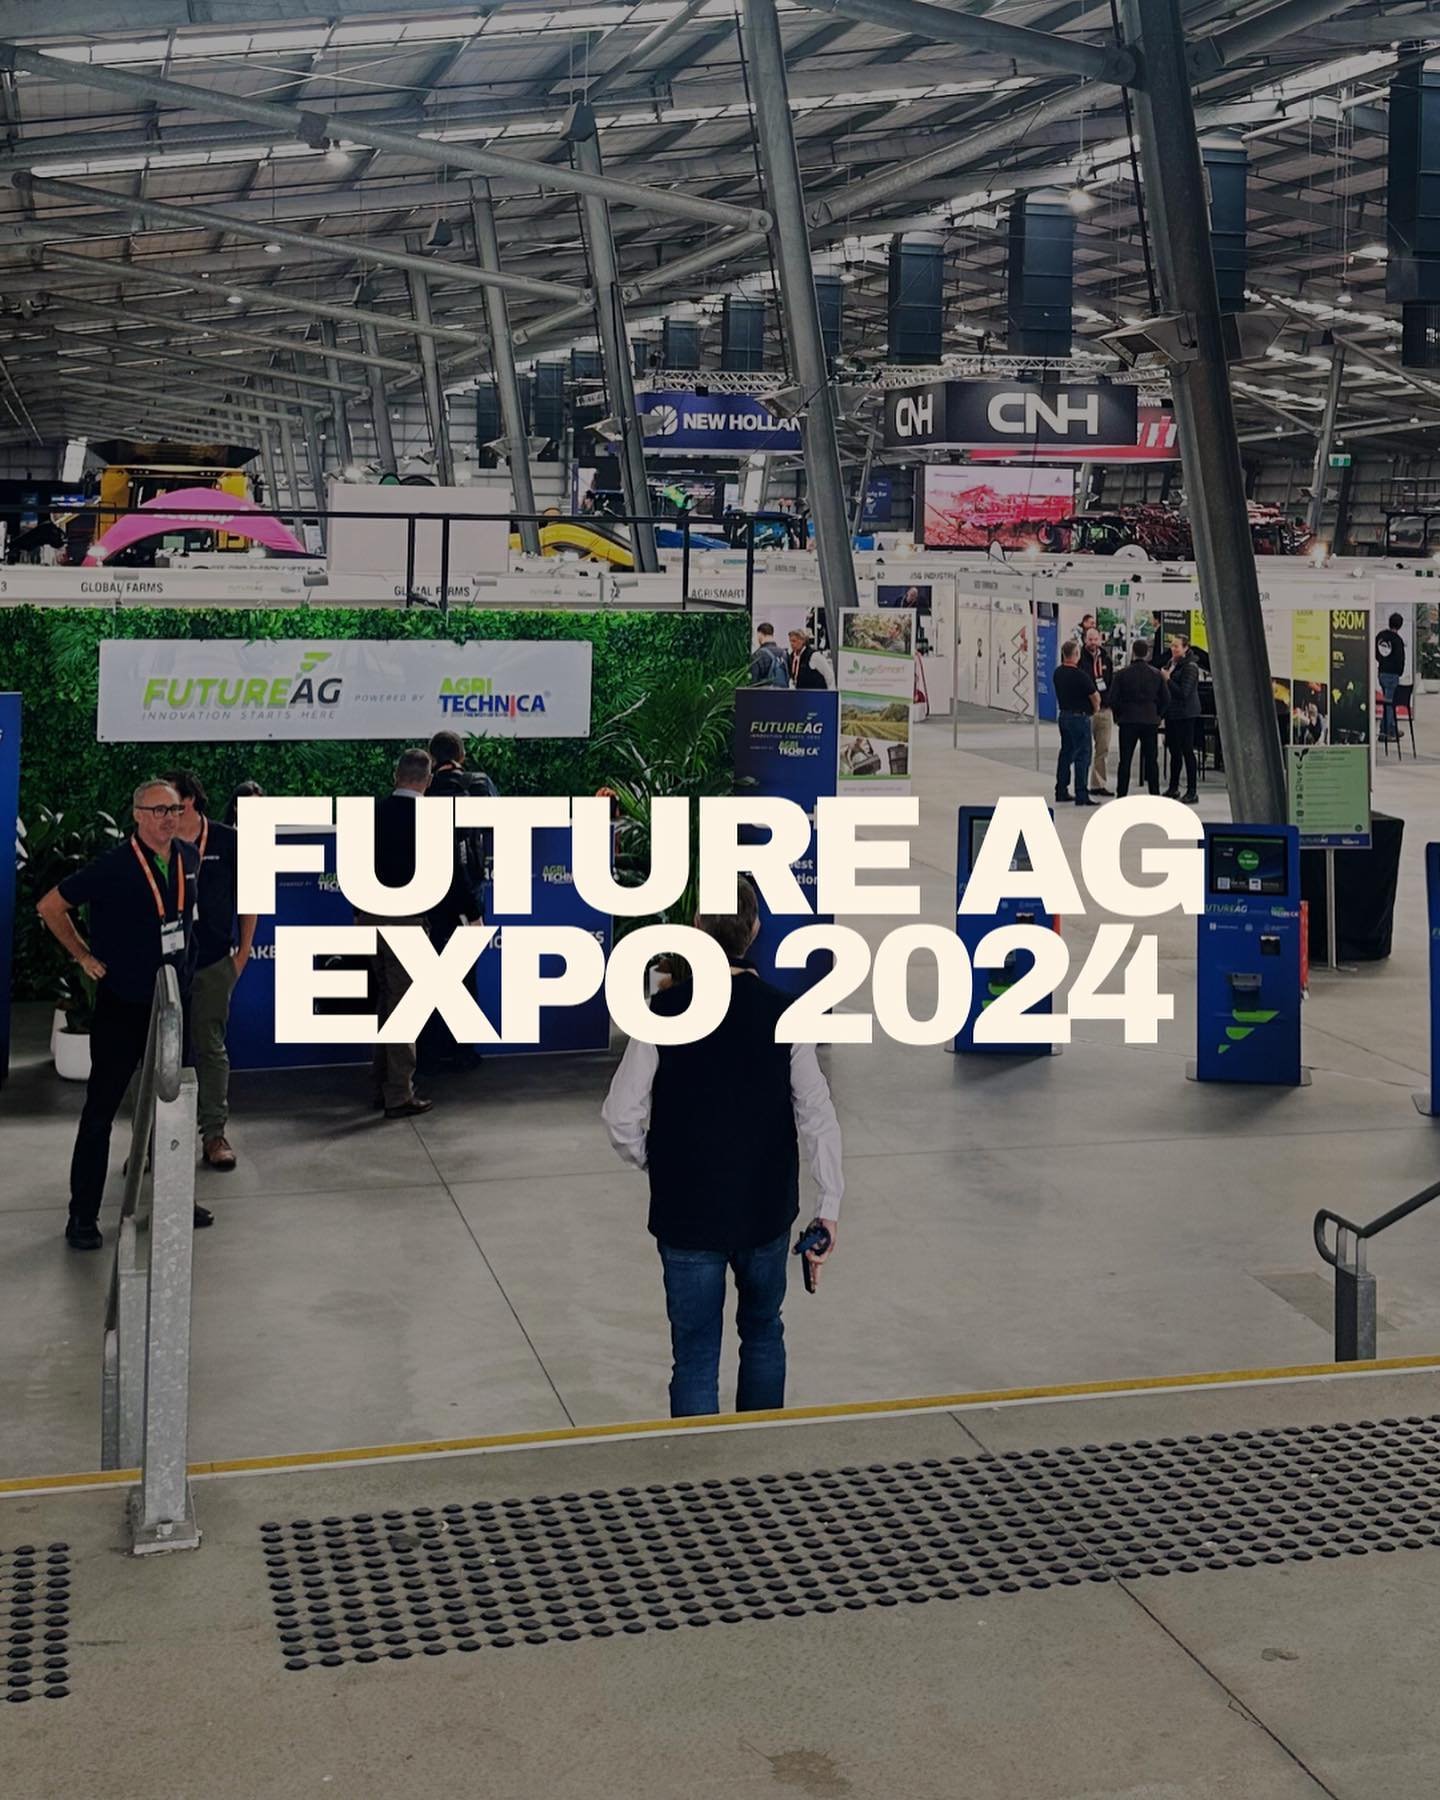 Today we attended the first - ever Future Ag expo at the Melbourne Showgrounds, and what a great day it was. It was great to connect and meet like minded people and businesses doing amazing work in the agriculture space. 

At Iridium we are extremely